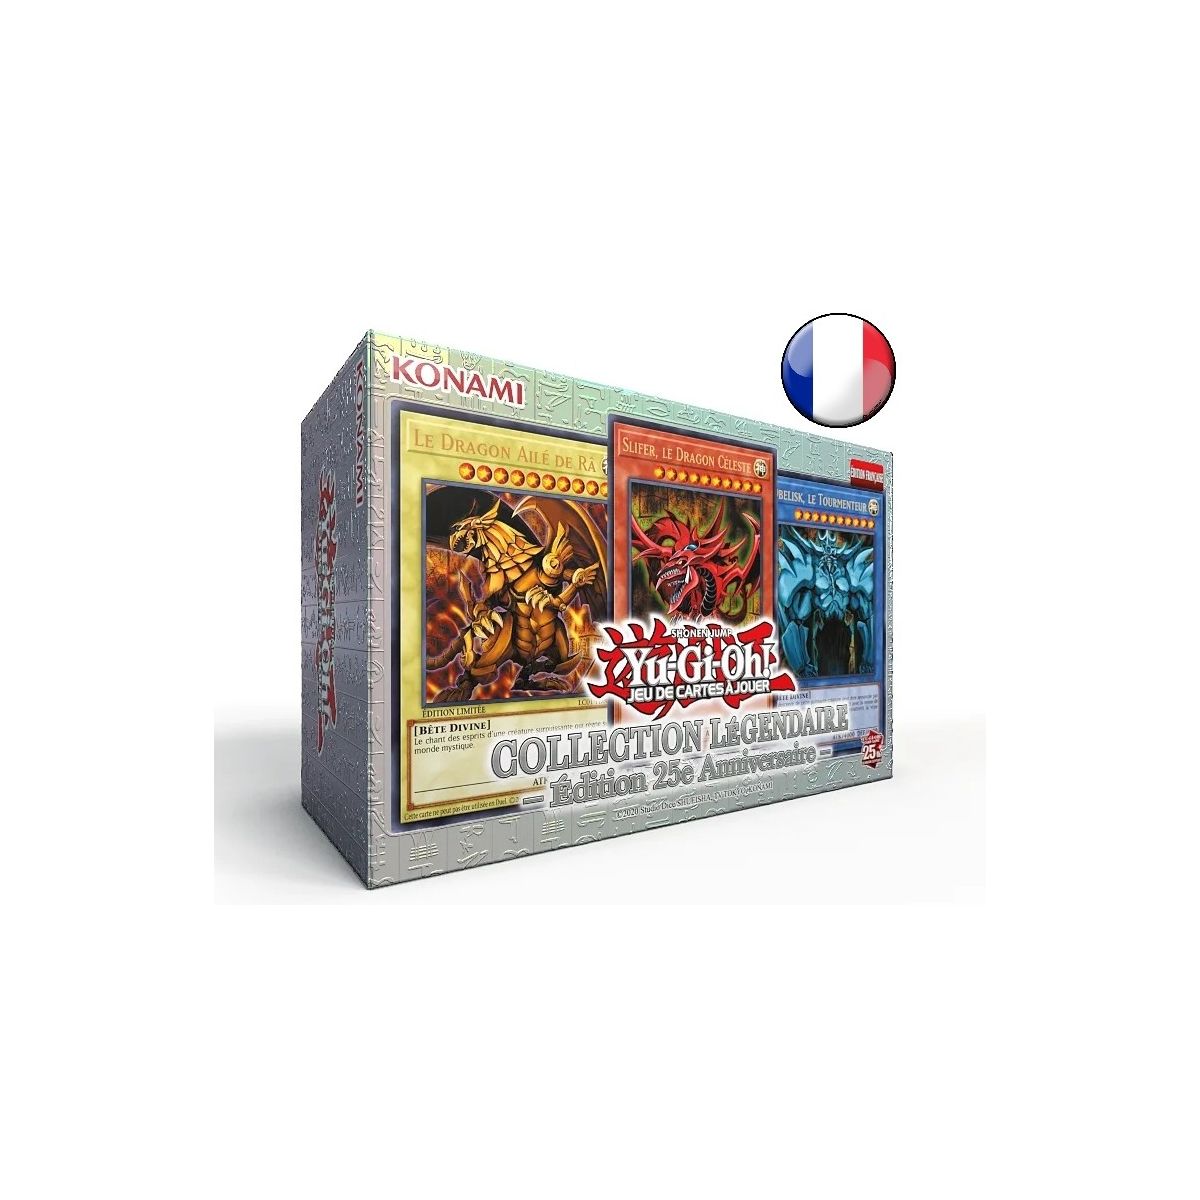 Item Yu Gi Oh! - Legendary Collection 25th Anniversary Box - Legendary Collection 25th Anniversary - FR